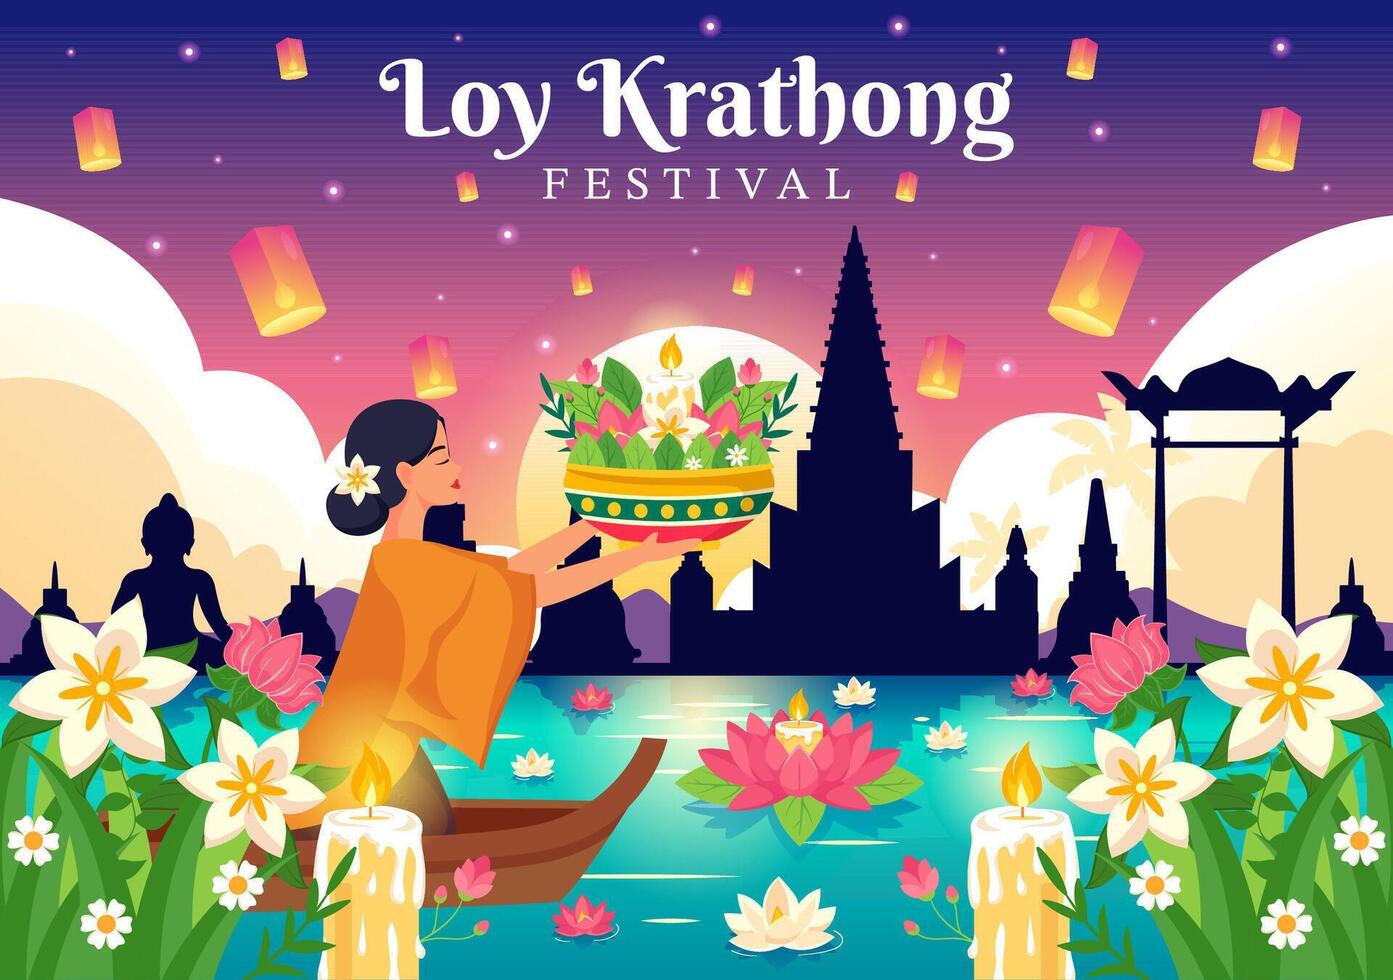 Loy Krathong Vector Illustration of Festival Celebration in Thailand with Lanterns and Krathongs Floating on Water Design in Flat Cartoon Background